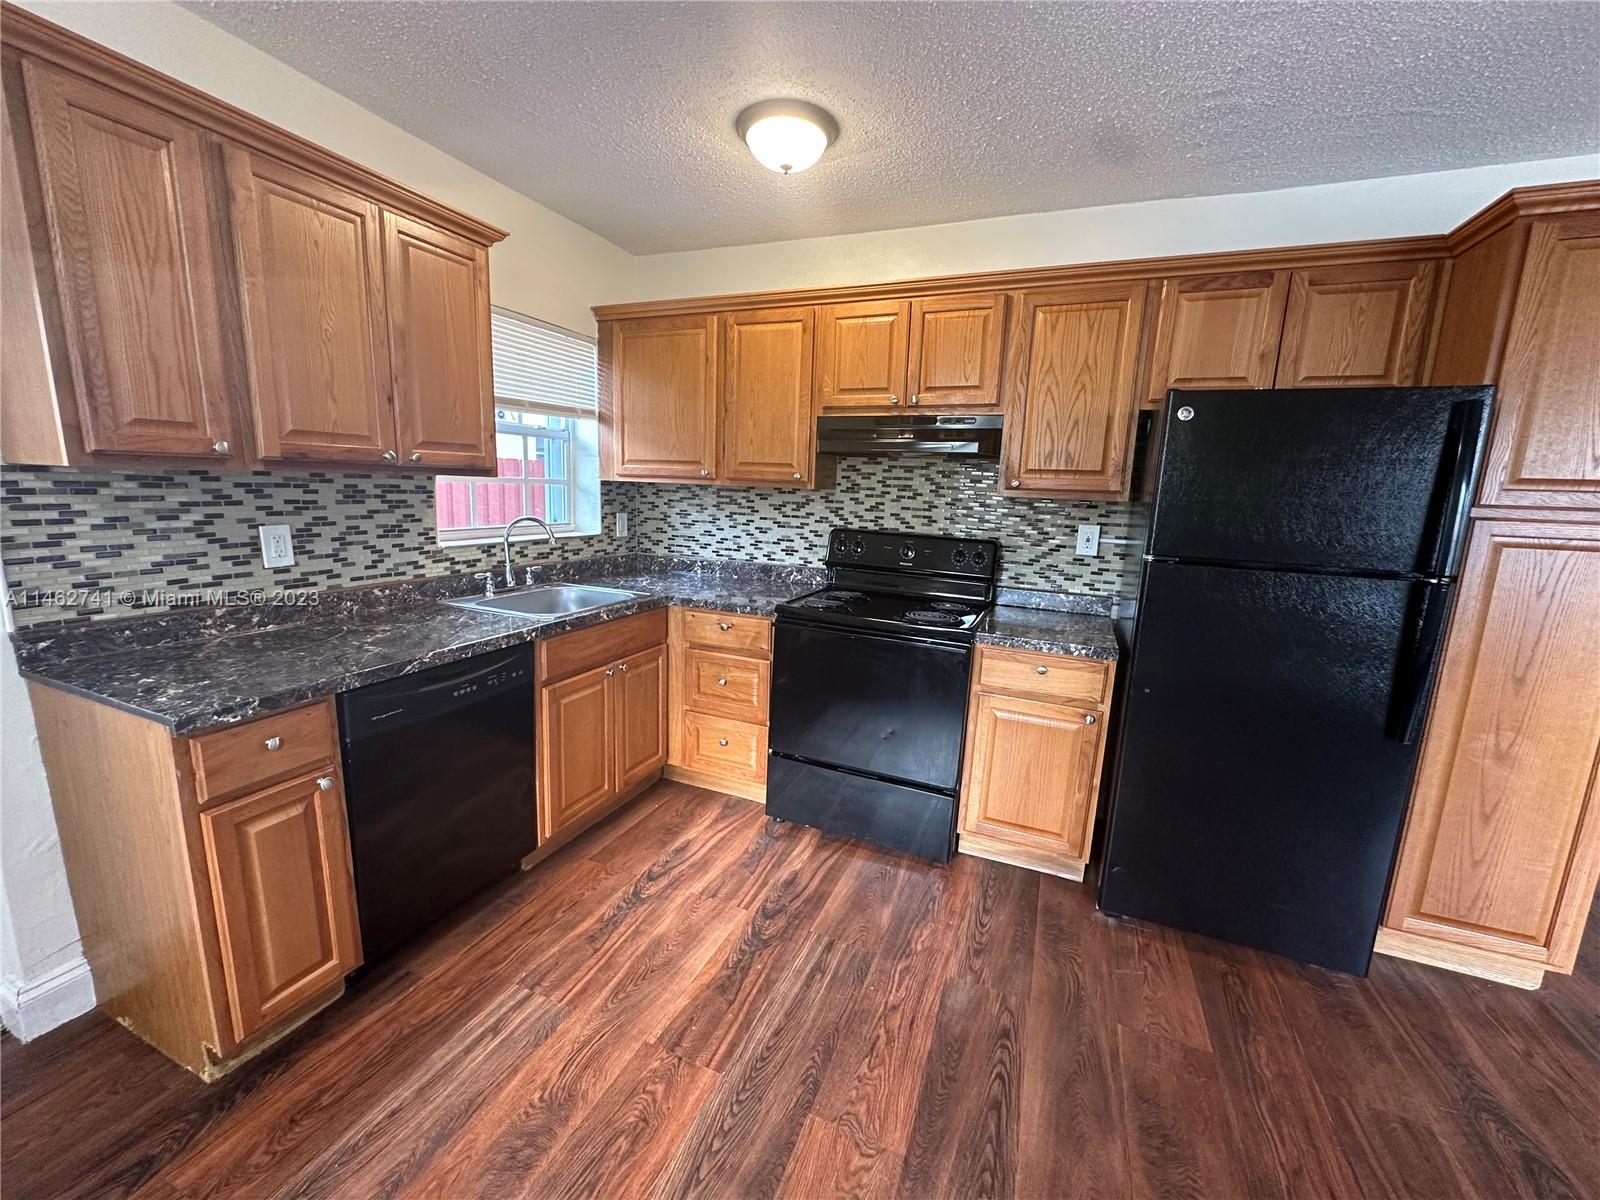 a kitchen with stainless steel appliances granite countertop a refrigerator a sink dishwasher a stove top oven a refrigerator and dishwasher with wooden floor